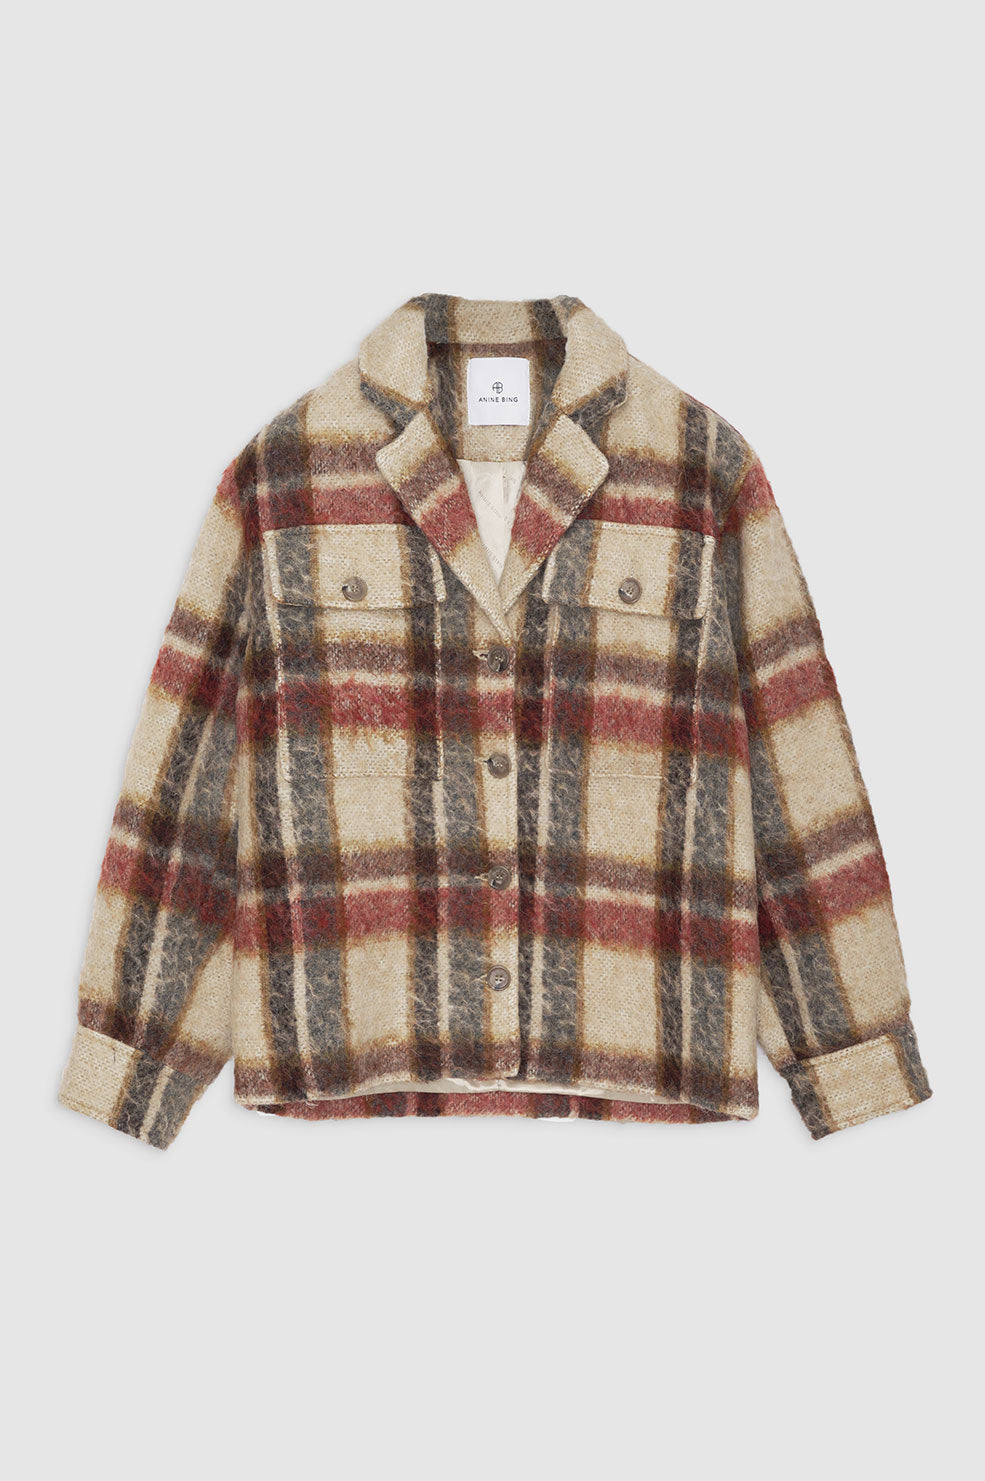 ANINE BING Flynn Jacket - Oatmeal Plaid - Front View